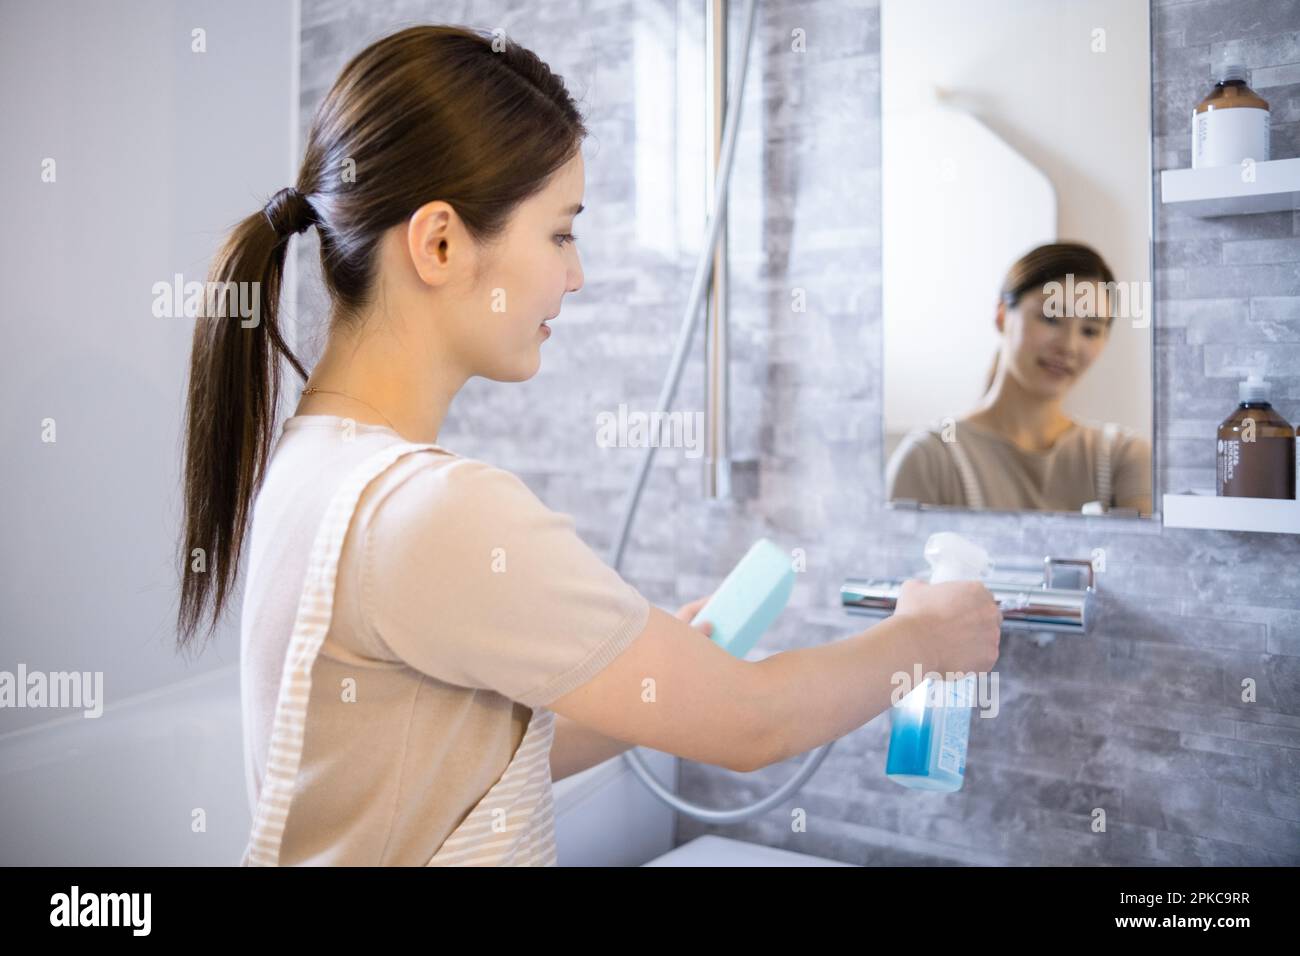 Woman cleaning the bath Stock Photo